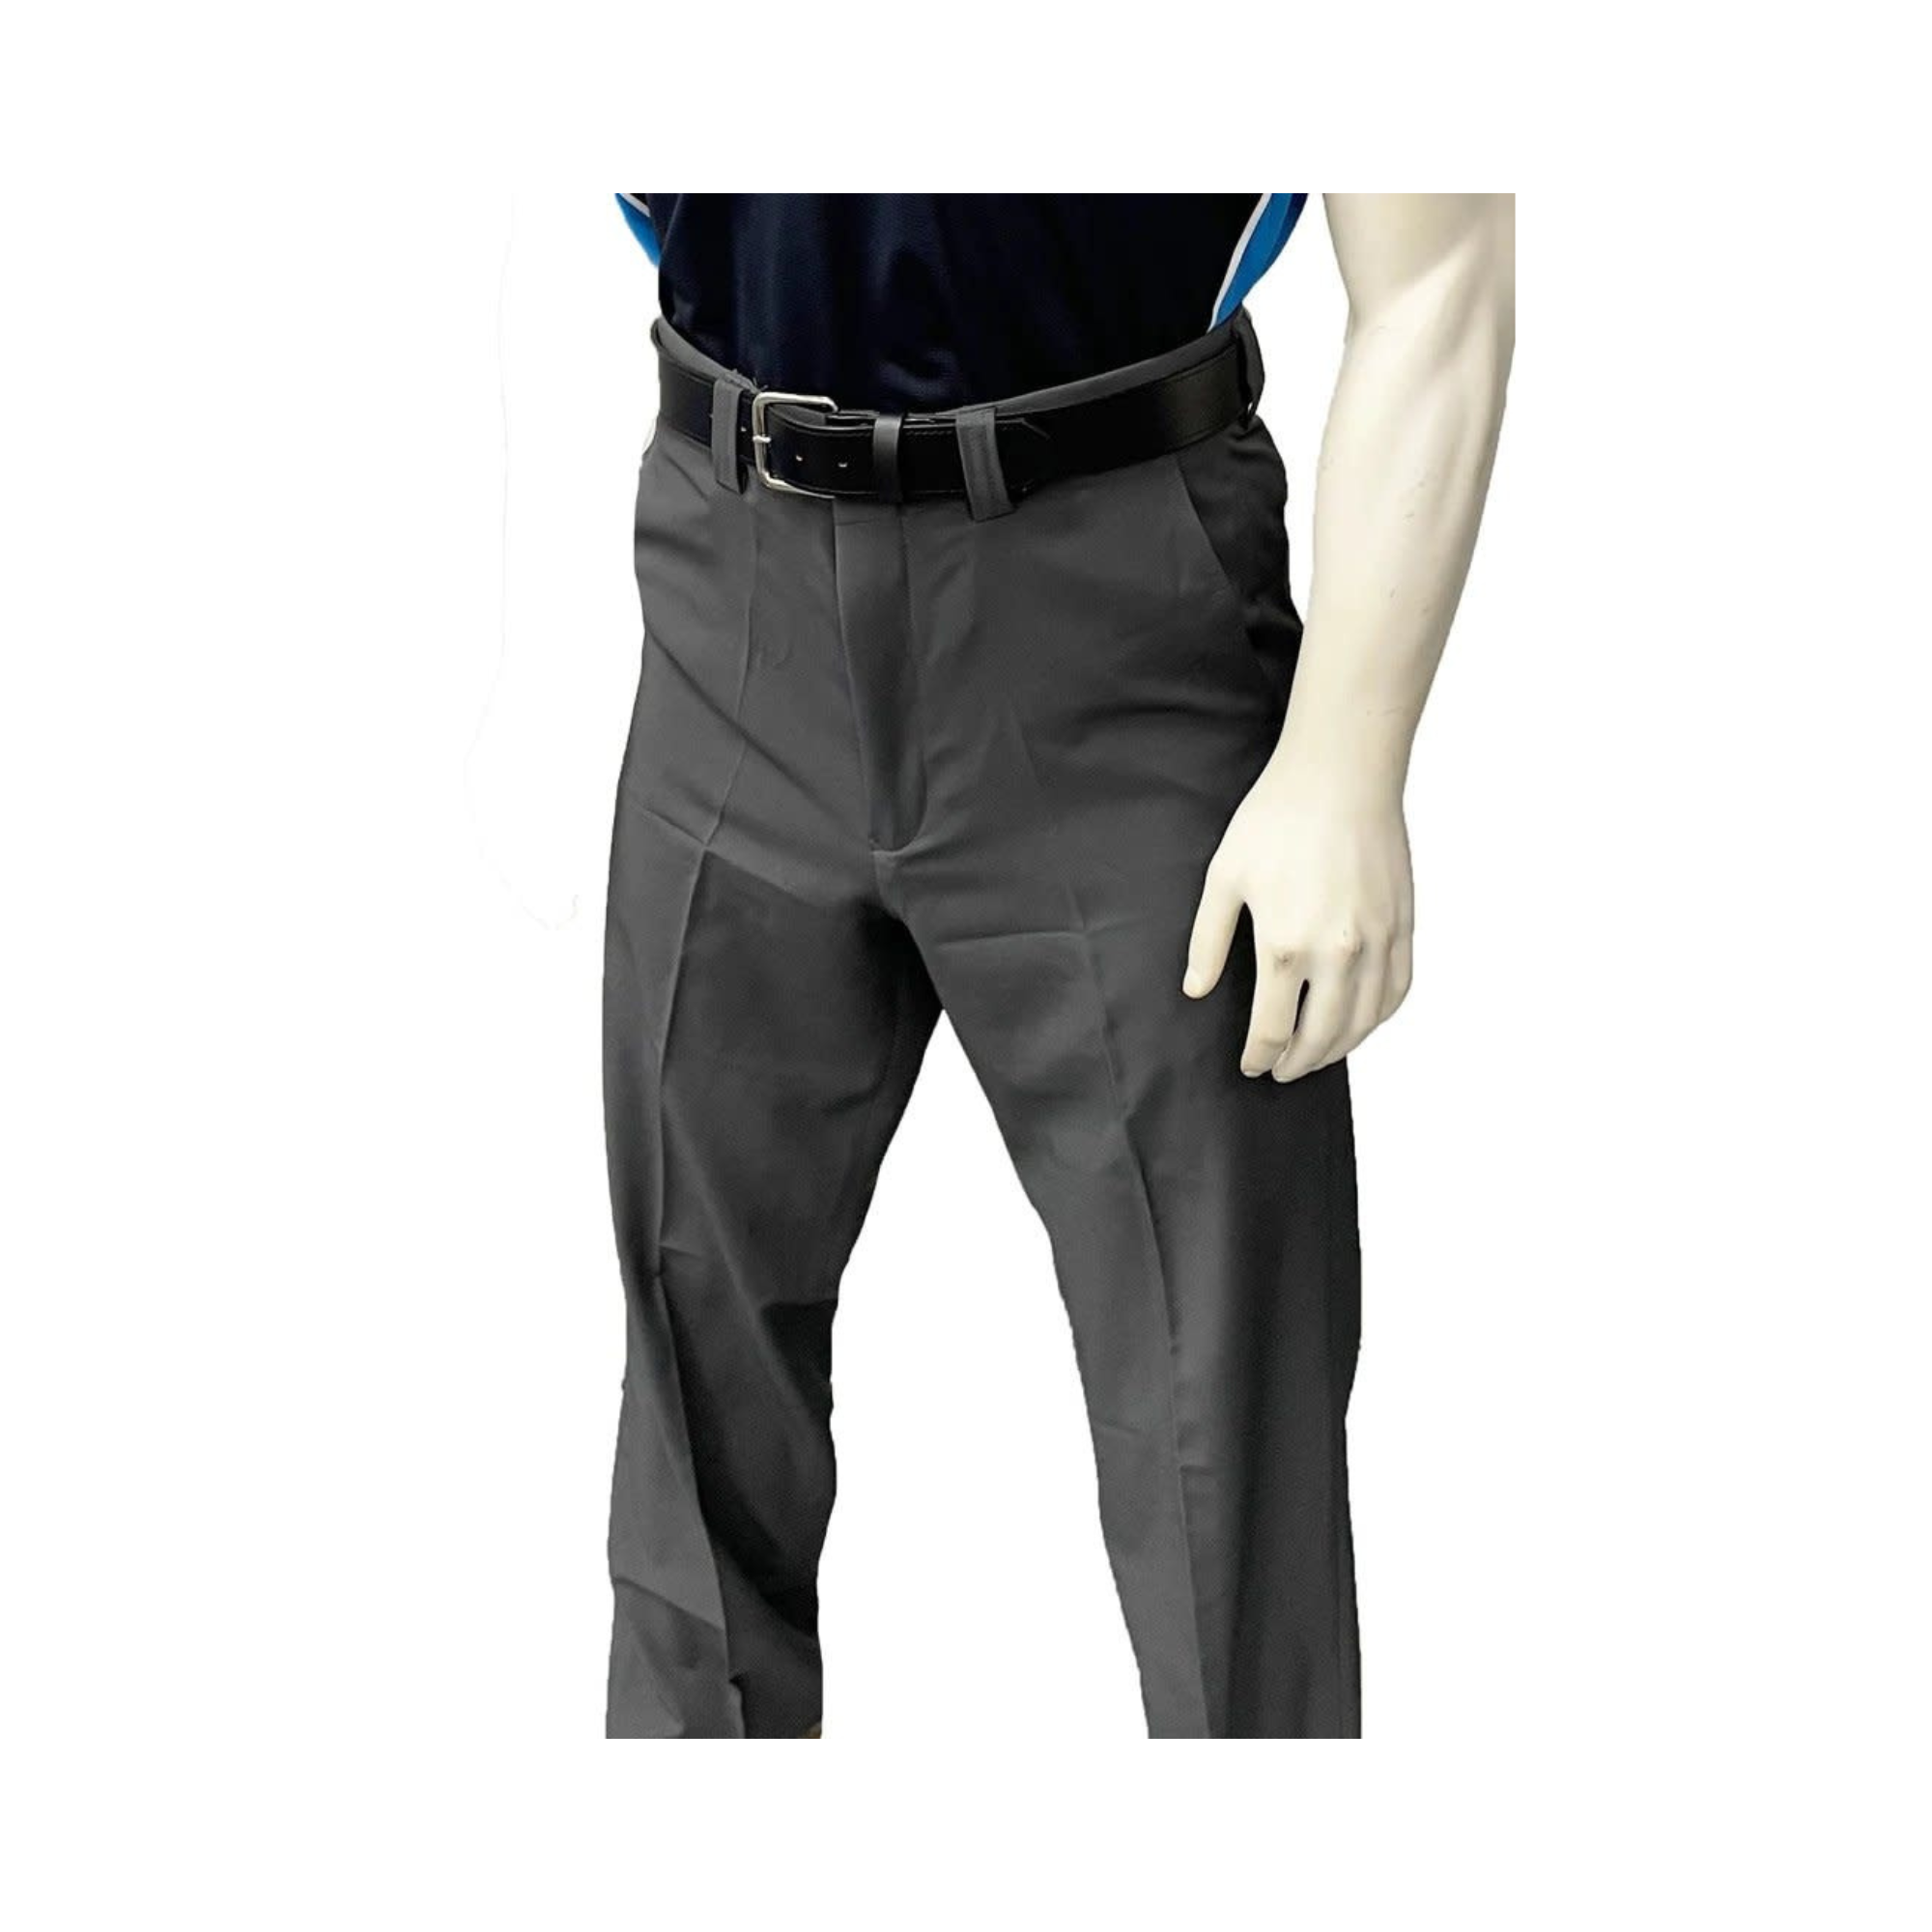 Smitty Mens 4-Way Stretch Flat Front Plate Pant Charcoal